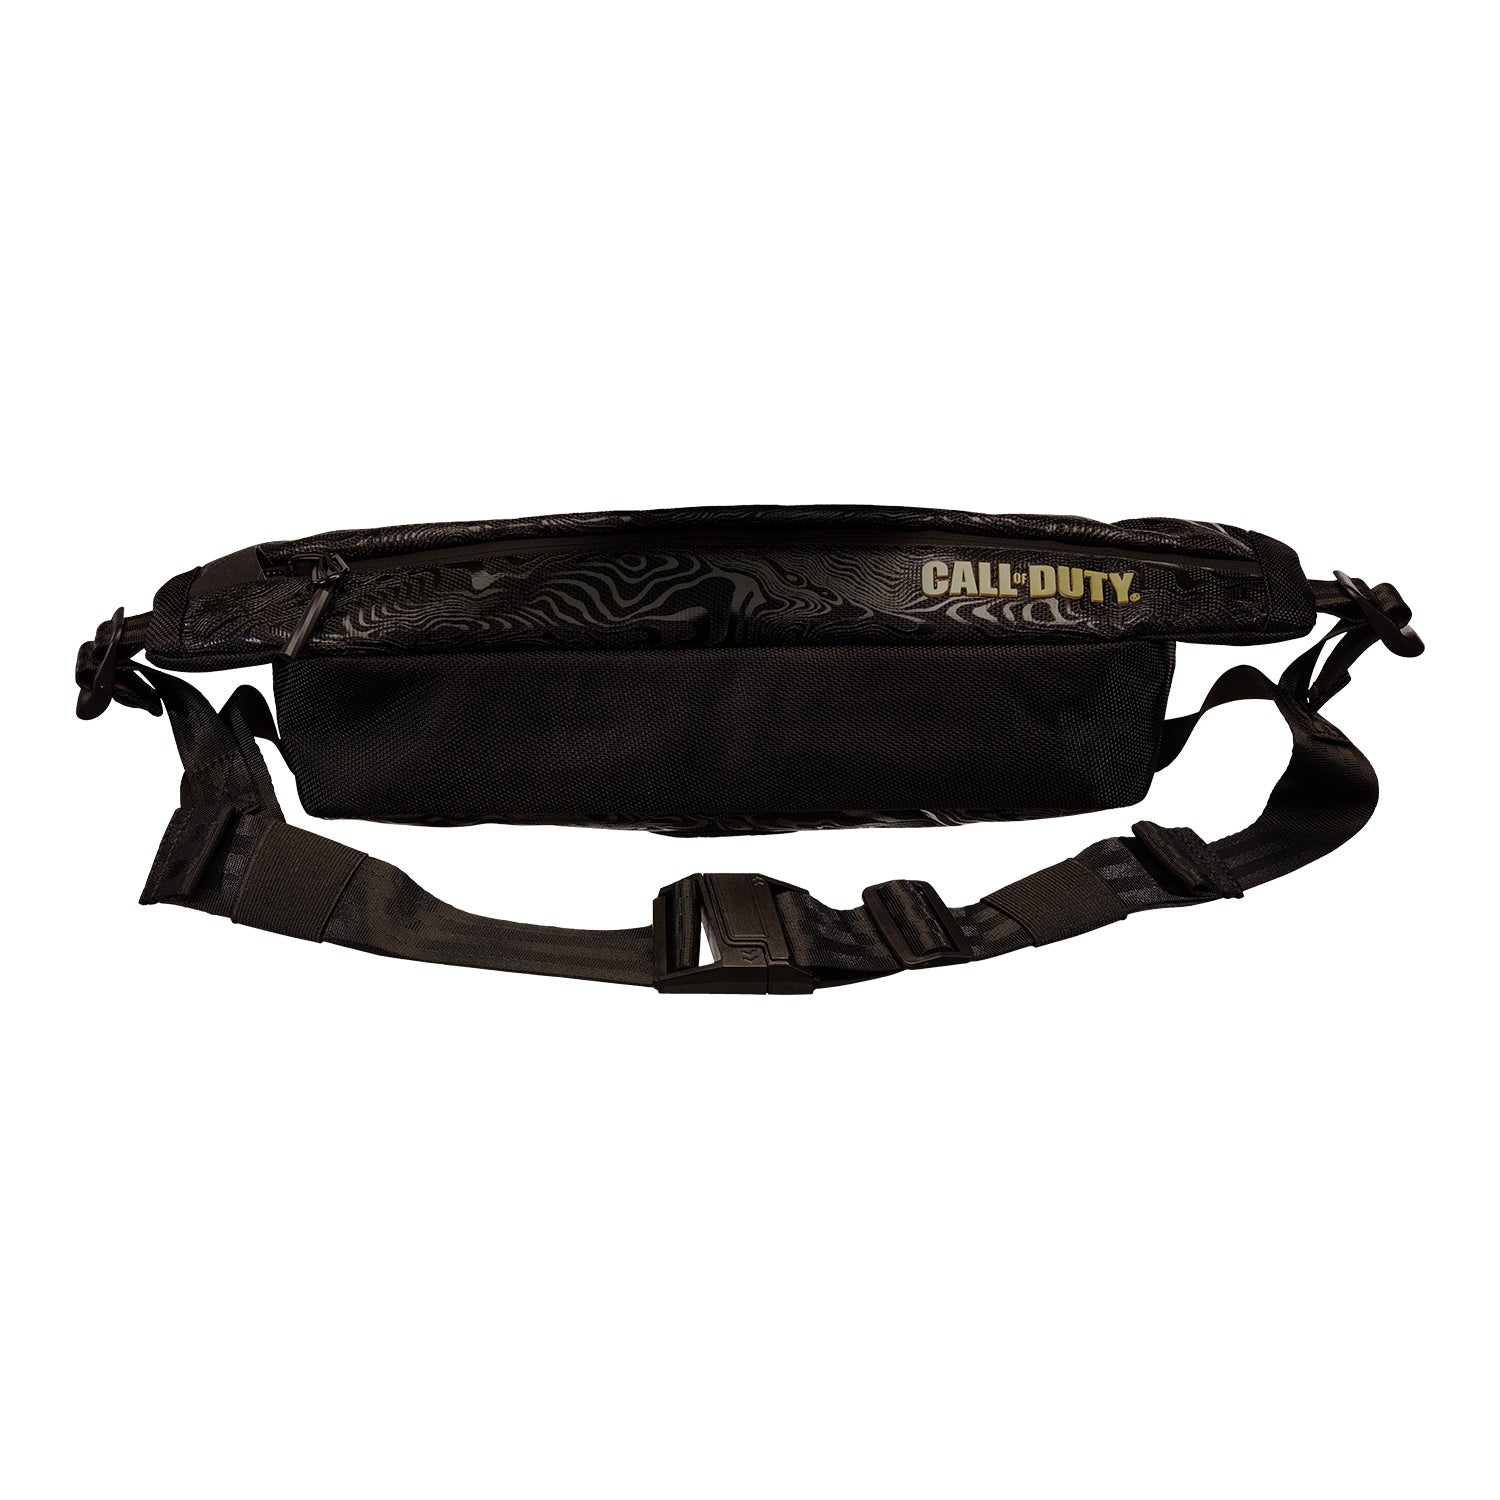 Call of Duty Task Force 141 Crossbody Sling Bag - Back View